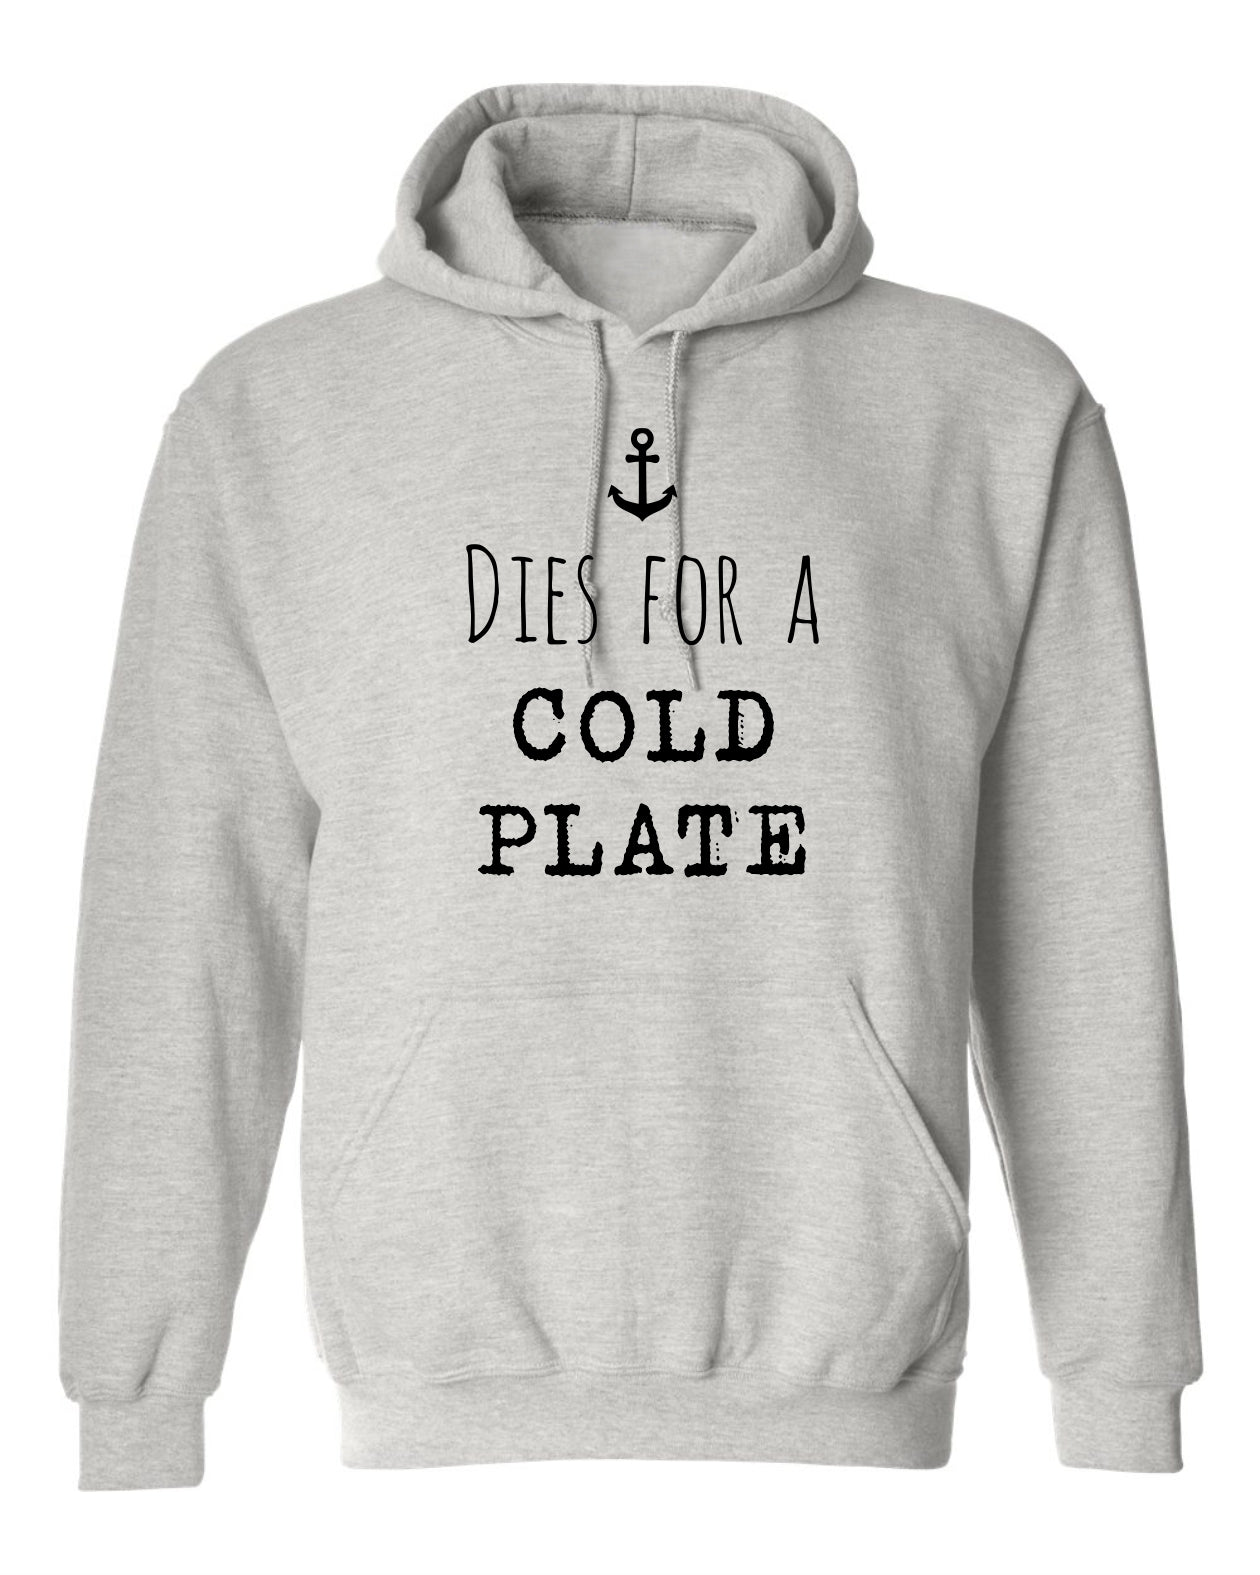 "Dies For A Cold Plate" Unisex Hoodie